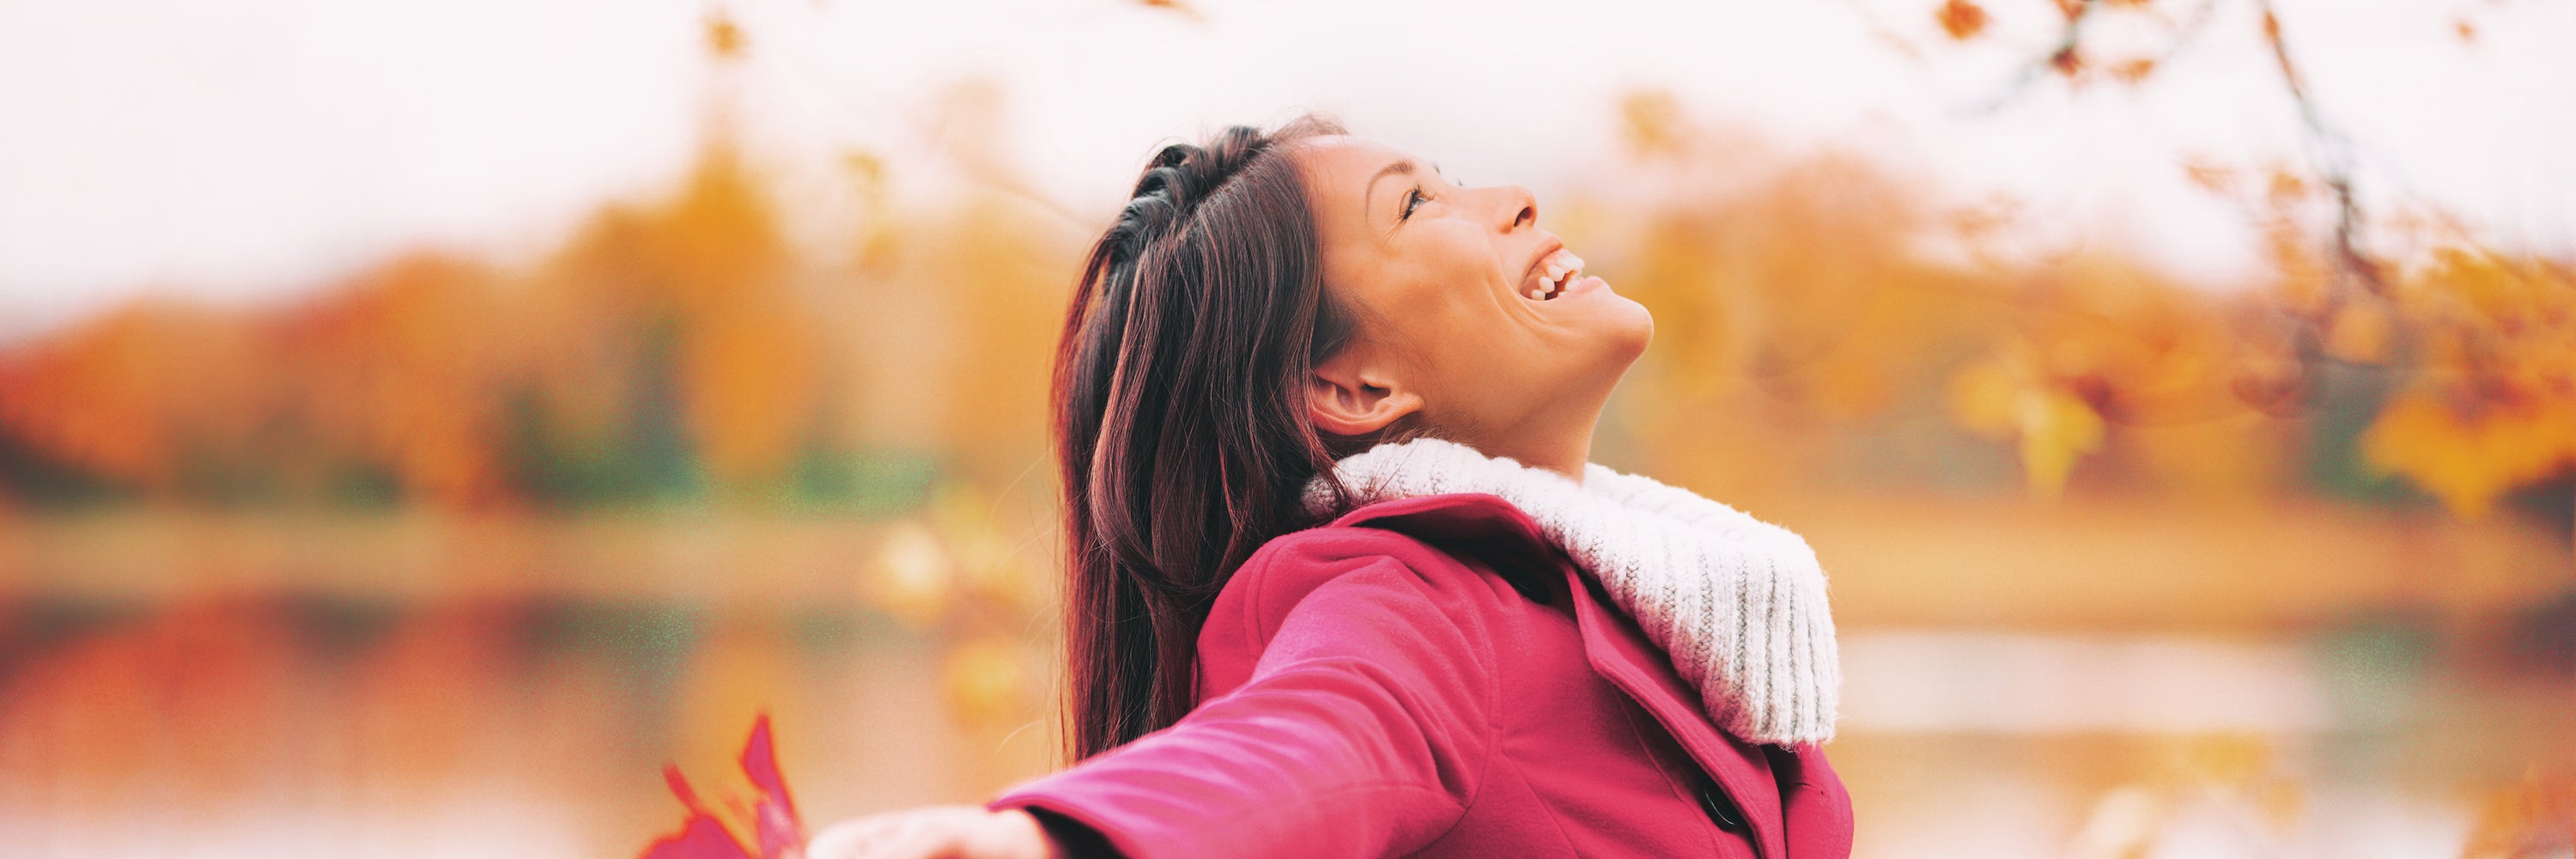 Five Ways to Feel Good (and Take Care of Yourself) this Fall